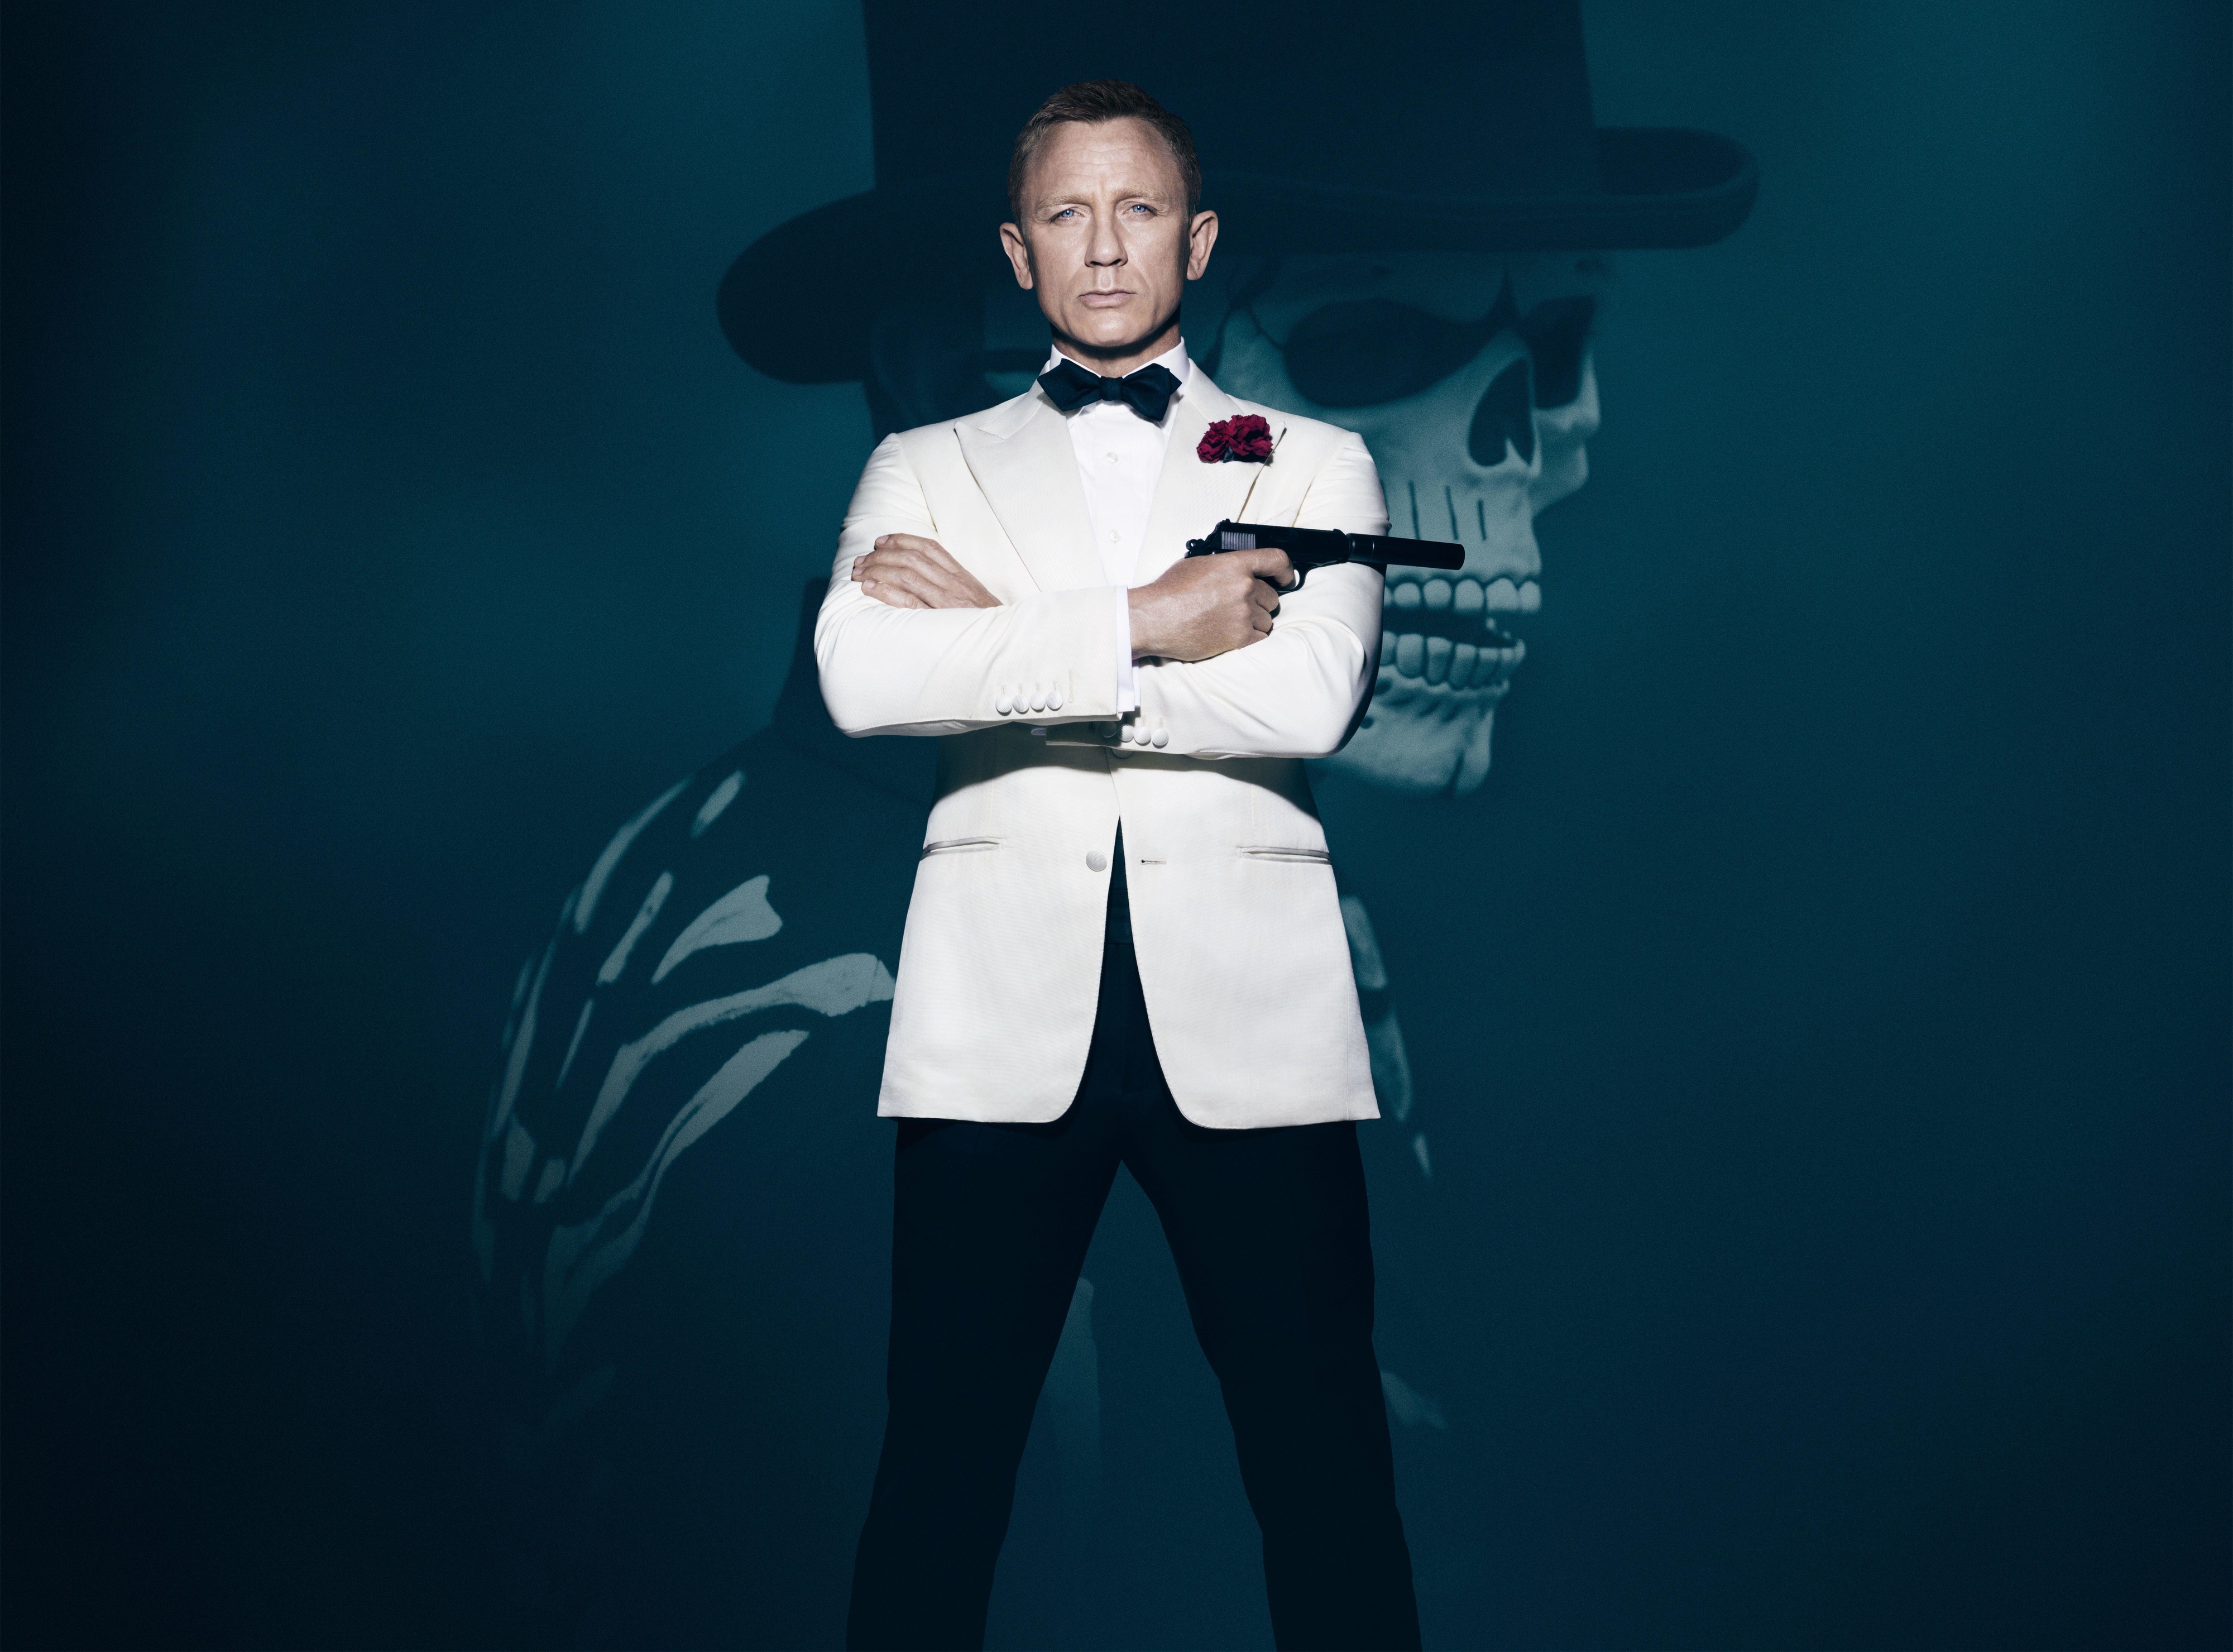 Daniel Craig poses in a white tuxedo with a pistol in front of the image of a man in a skull mask